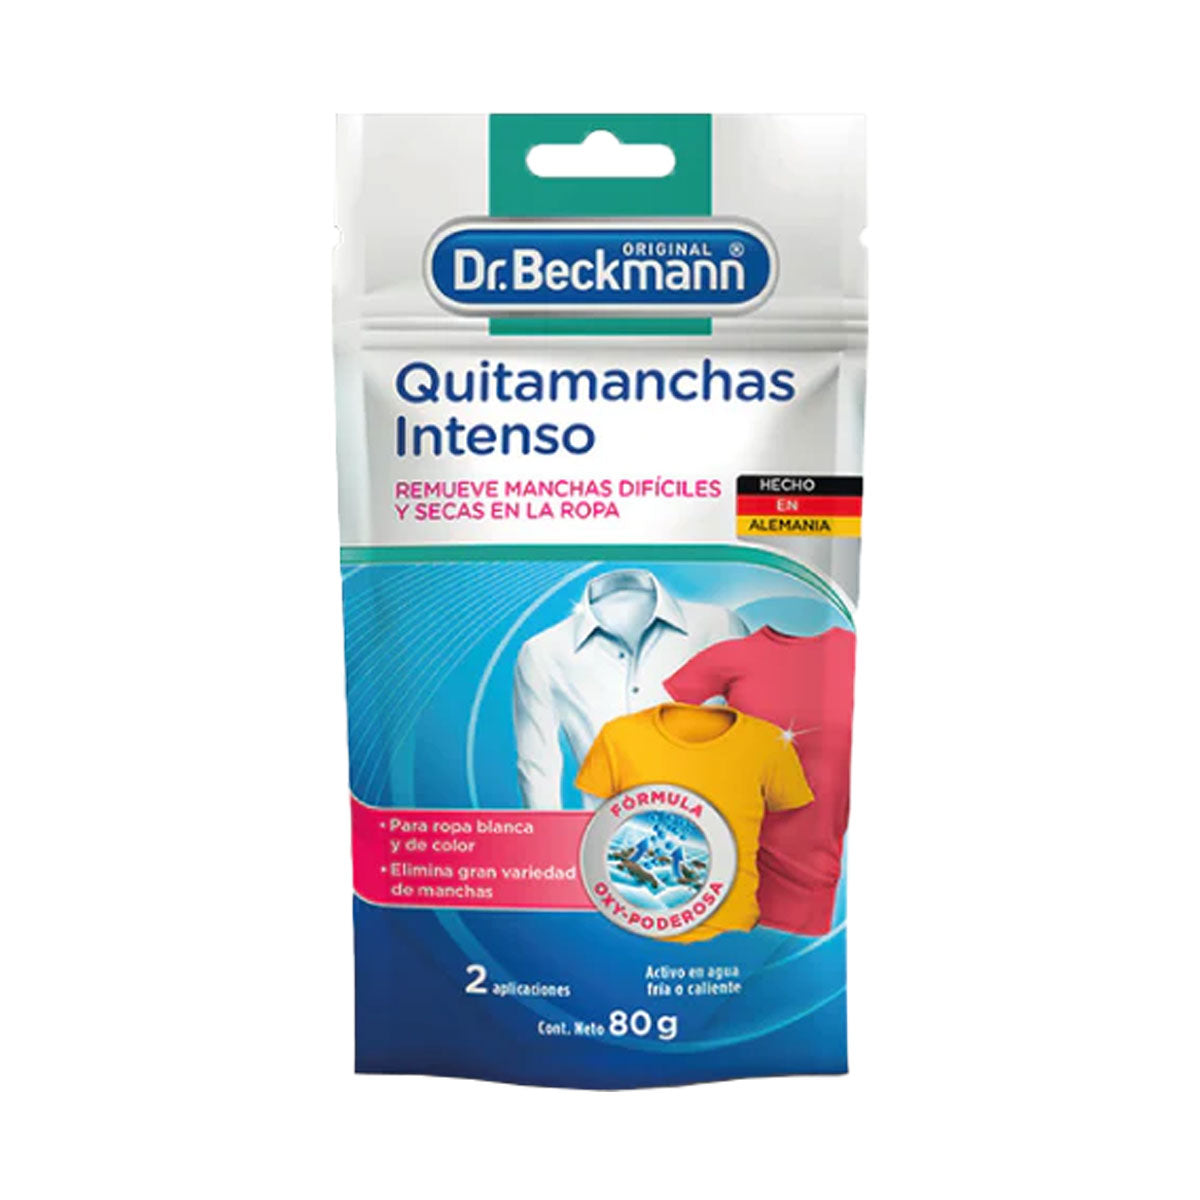 Quitamanchas Intenso para Ropa 80 gr Dr. Beckmann. Producto Alemán Sus